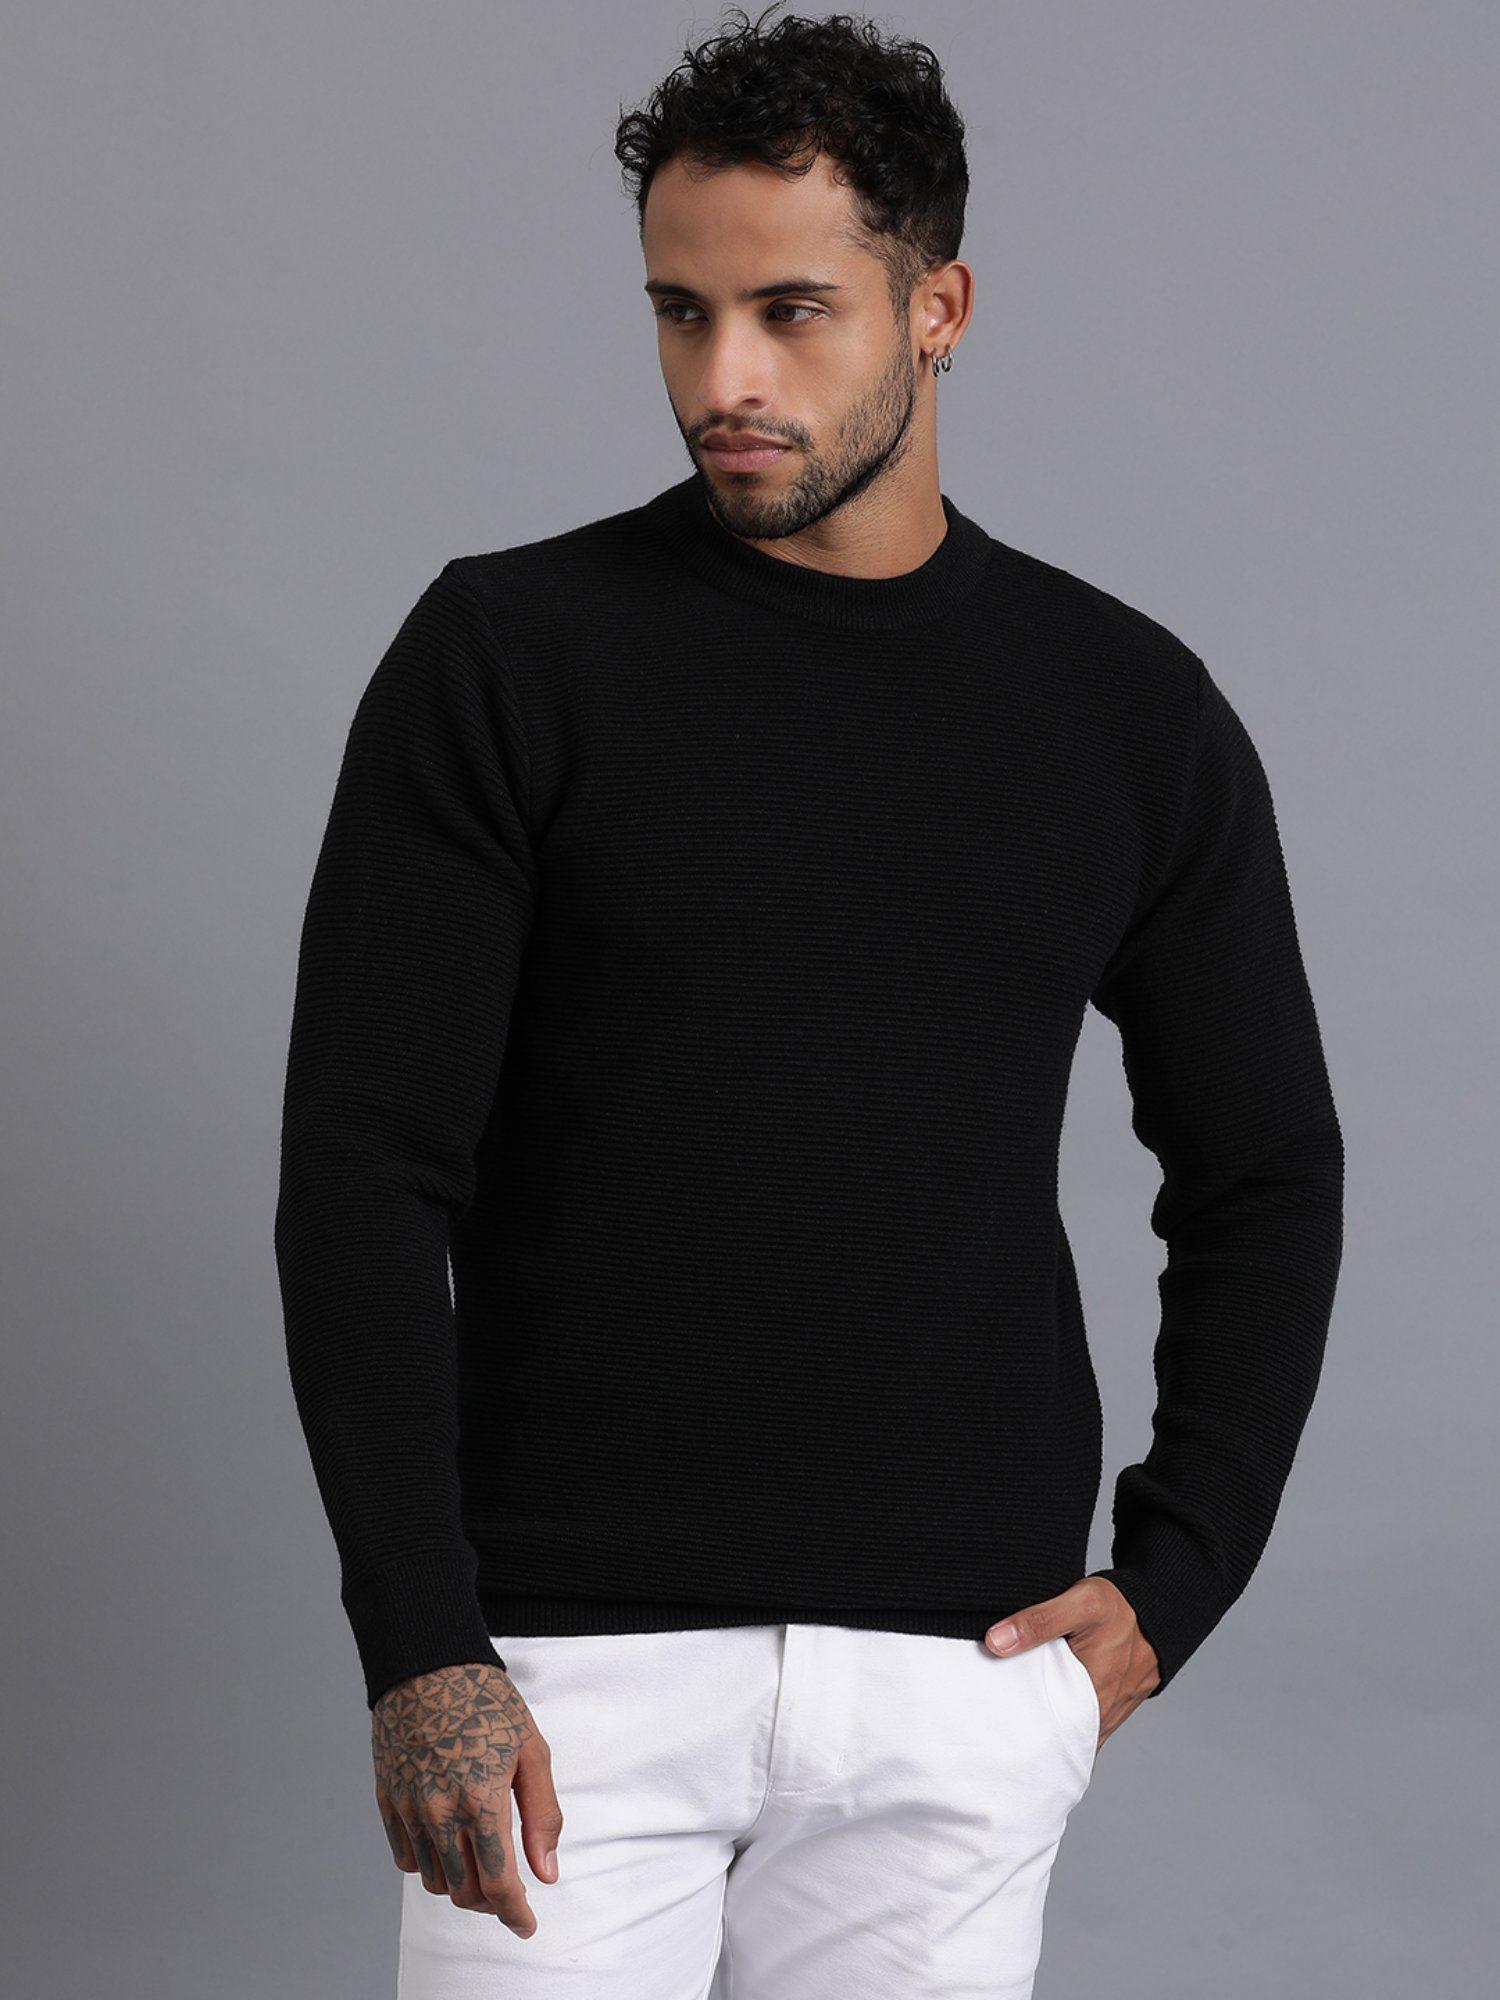 black luxury lateral designer knitted mens wool pullover sweater